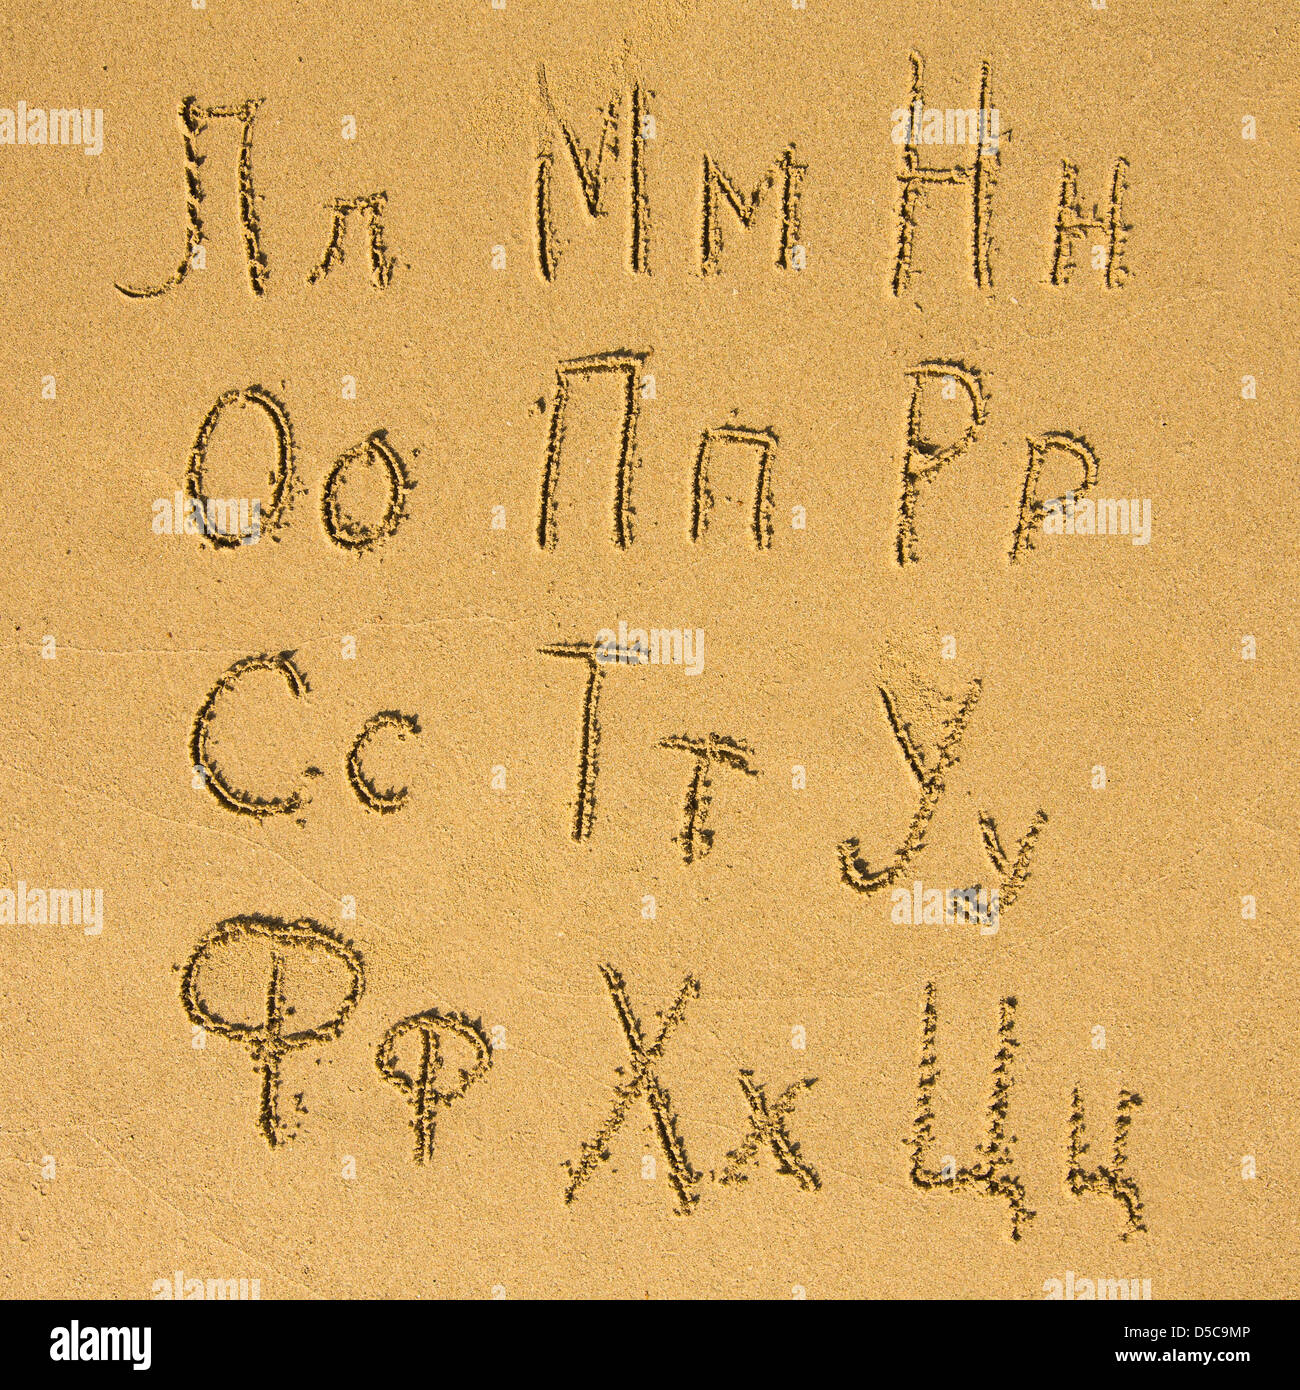 The russian alphabet written on a sand beach. (L-C, part the second of three) Stock Photo